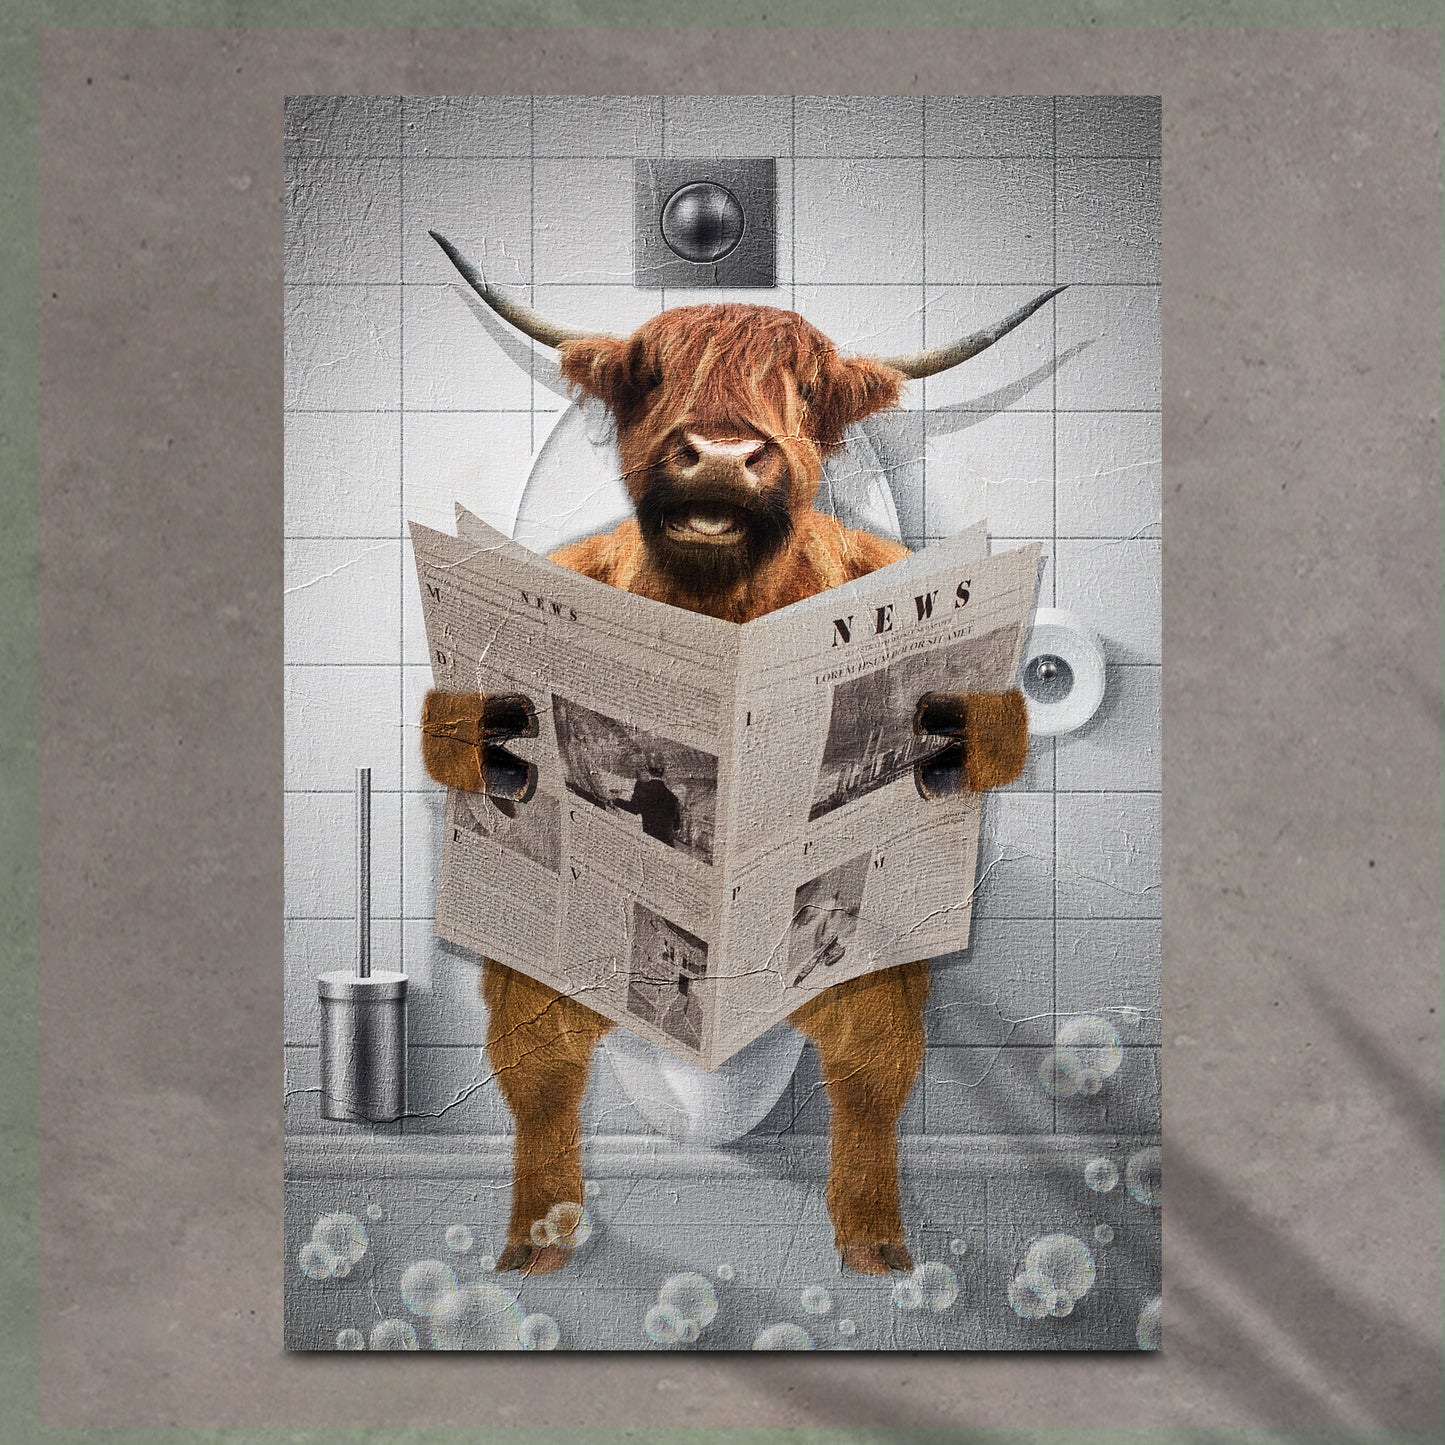 Highland Cattle Reading Newspaper Portrait Canvas Wall Art - Image by Tailored Canvases